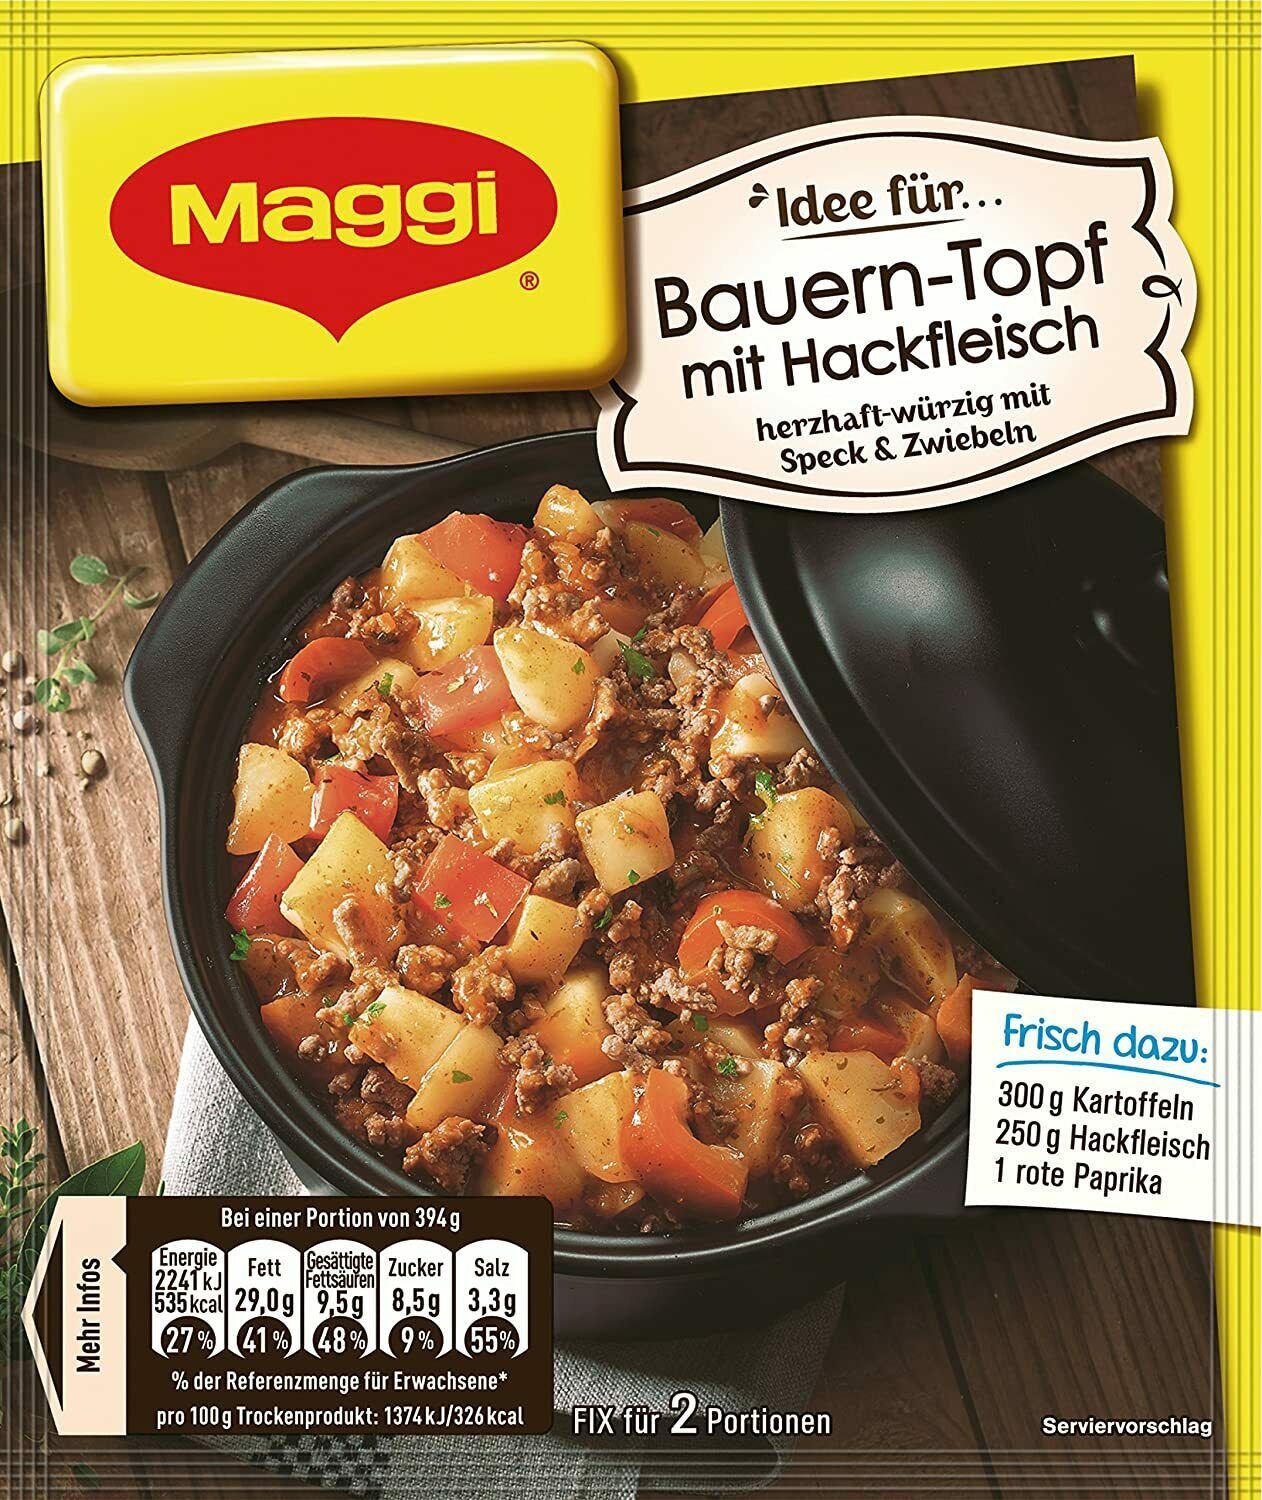 Primary image for Maggi Bauern-Topf mit Hackfleisch Farmer's pot -1ct./2 servings-FREE SHIP